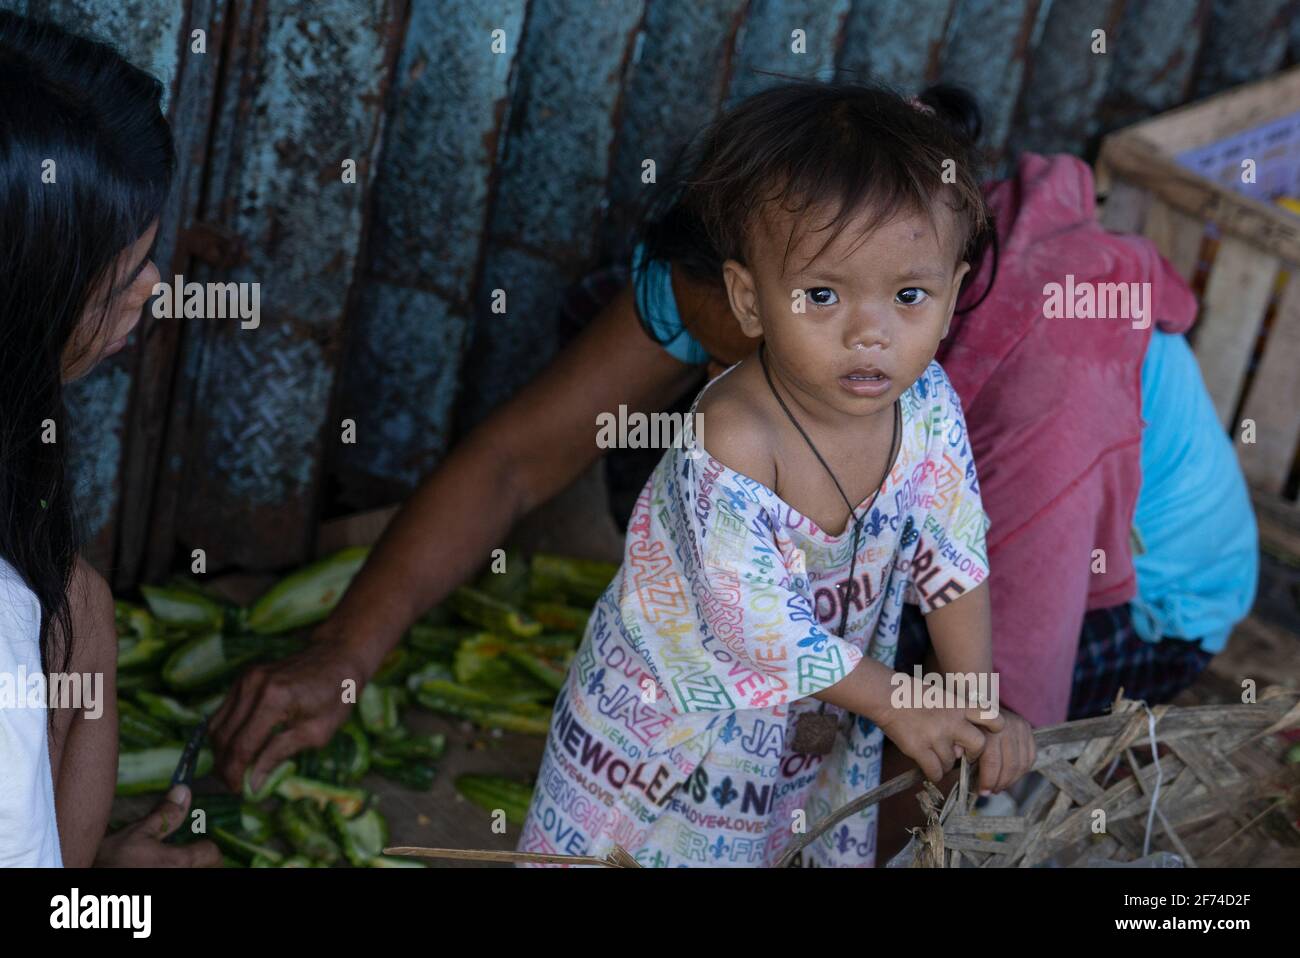 A young child in a poor area of Cebu City, Philippines looks up at the camera as the picture is taken Stock Photo